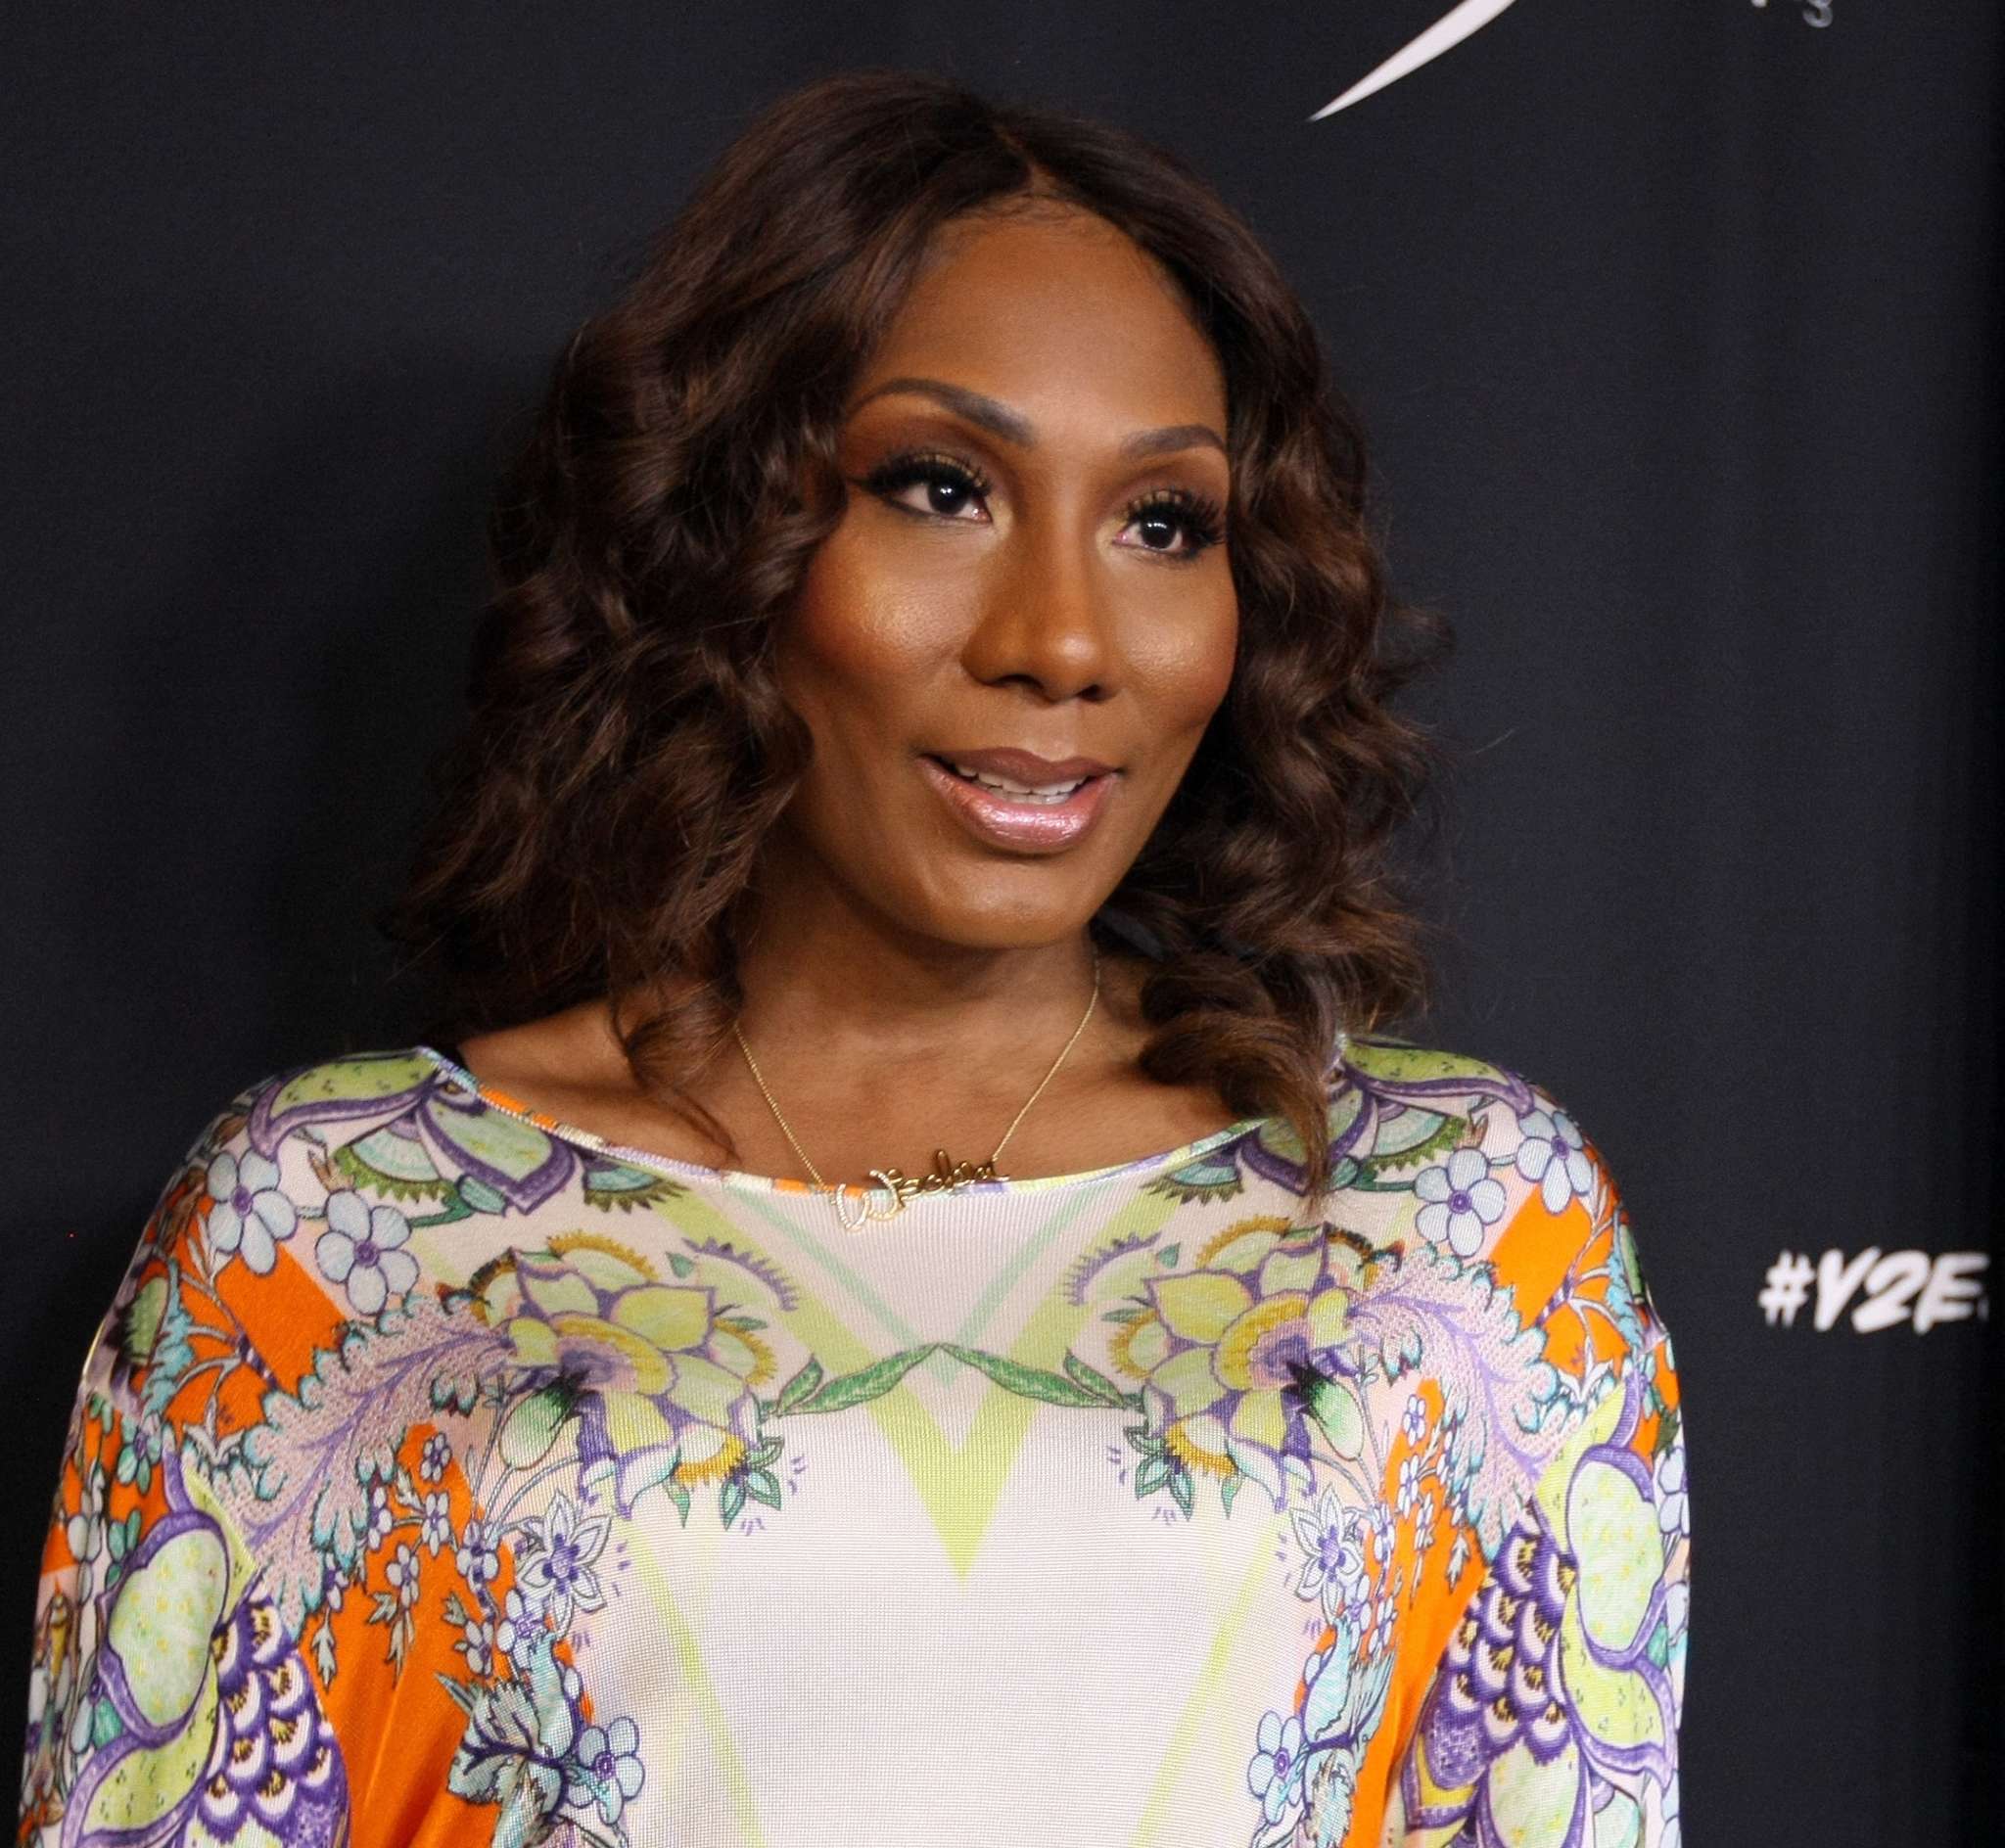 Towanda Braxton's BF Surprised Her With A Birthday Dinner - Check Out Her Video